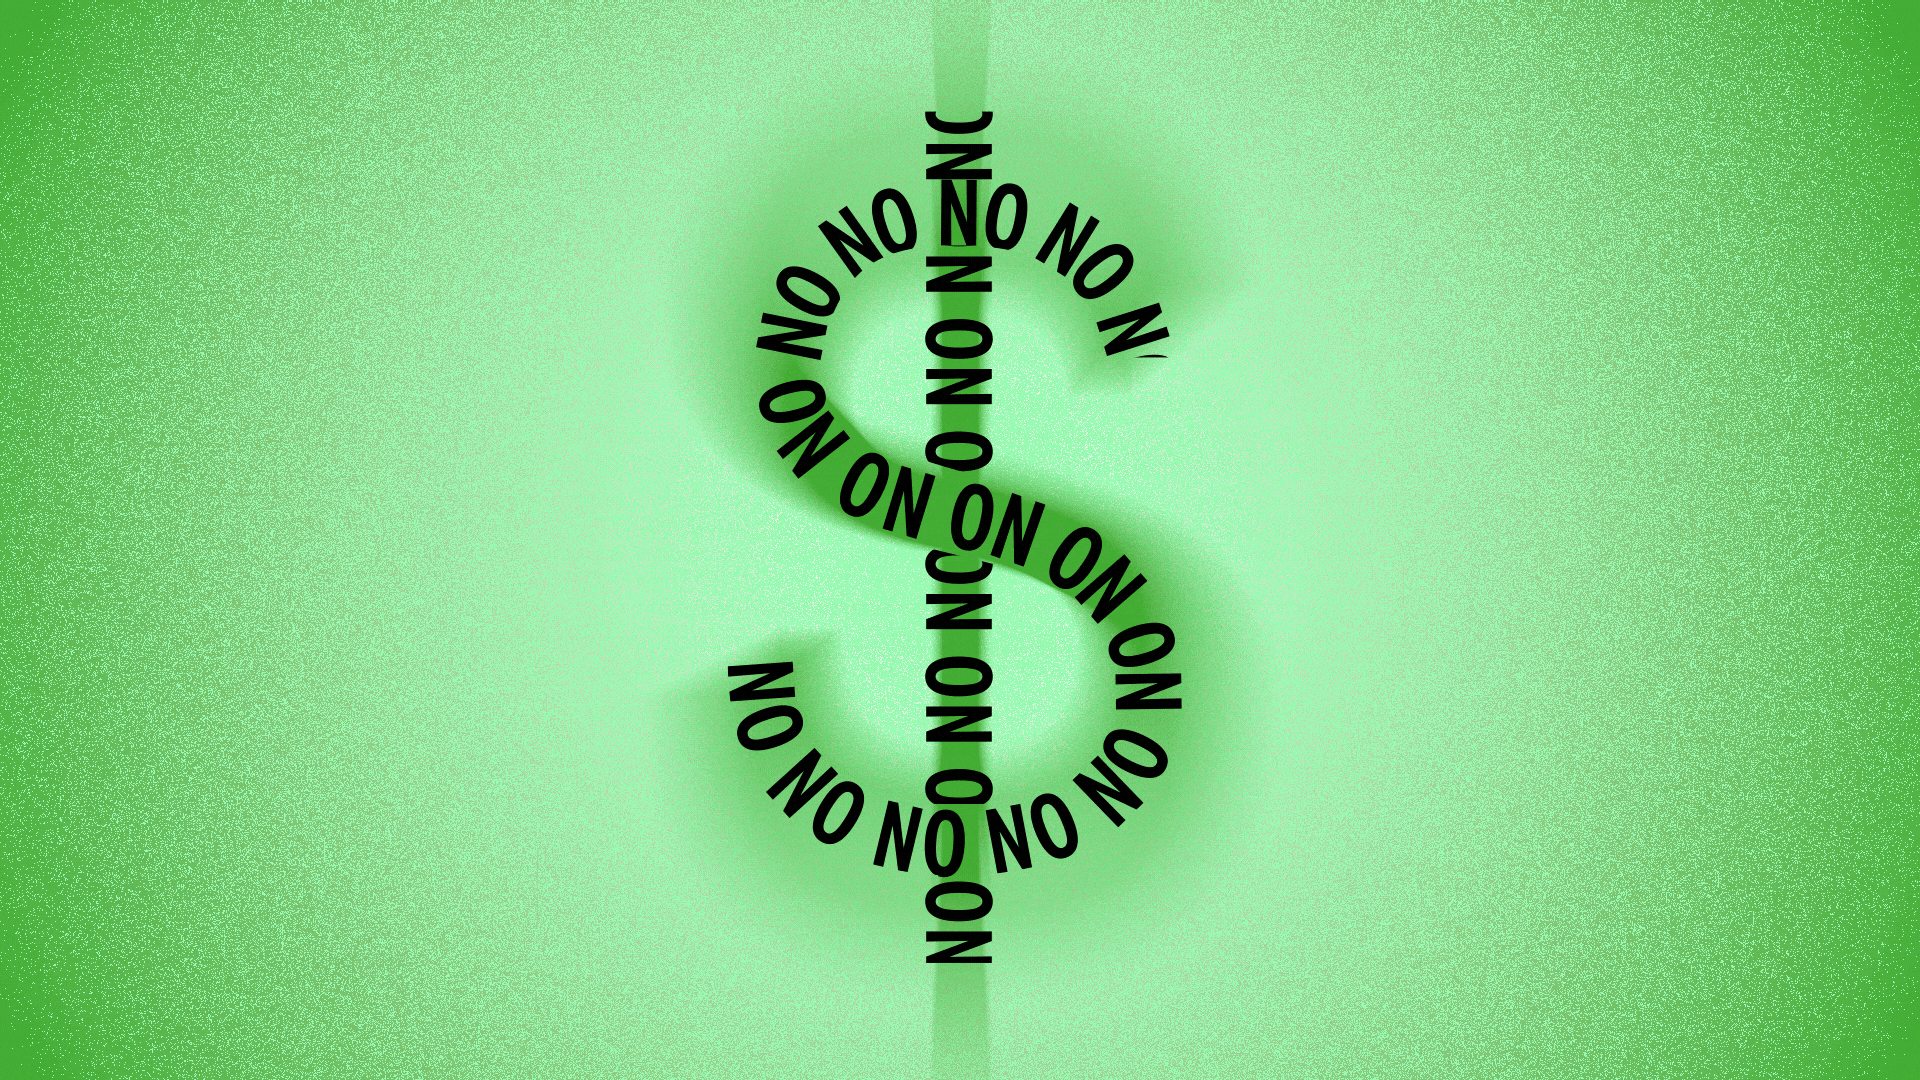 Illustration of the word "no," repeated and moving along the shape of a dollar sign.